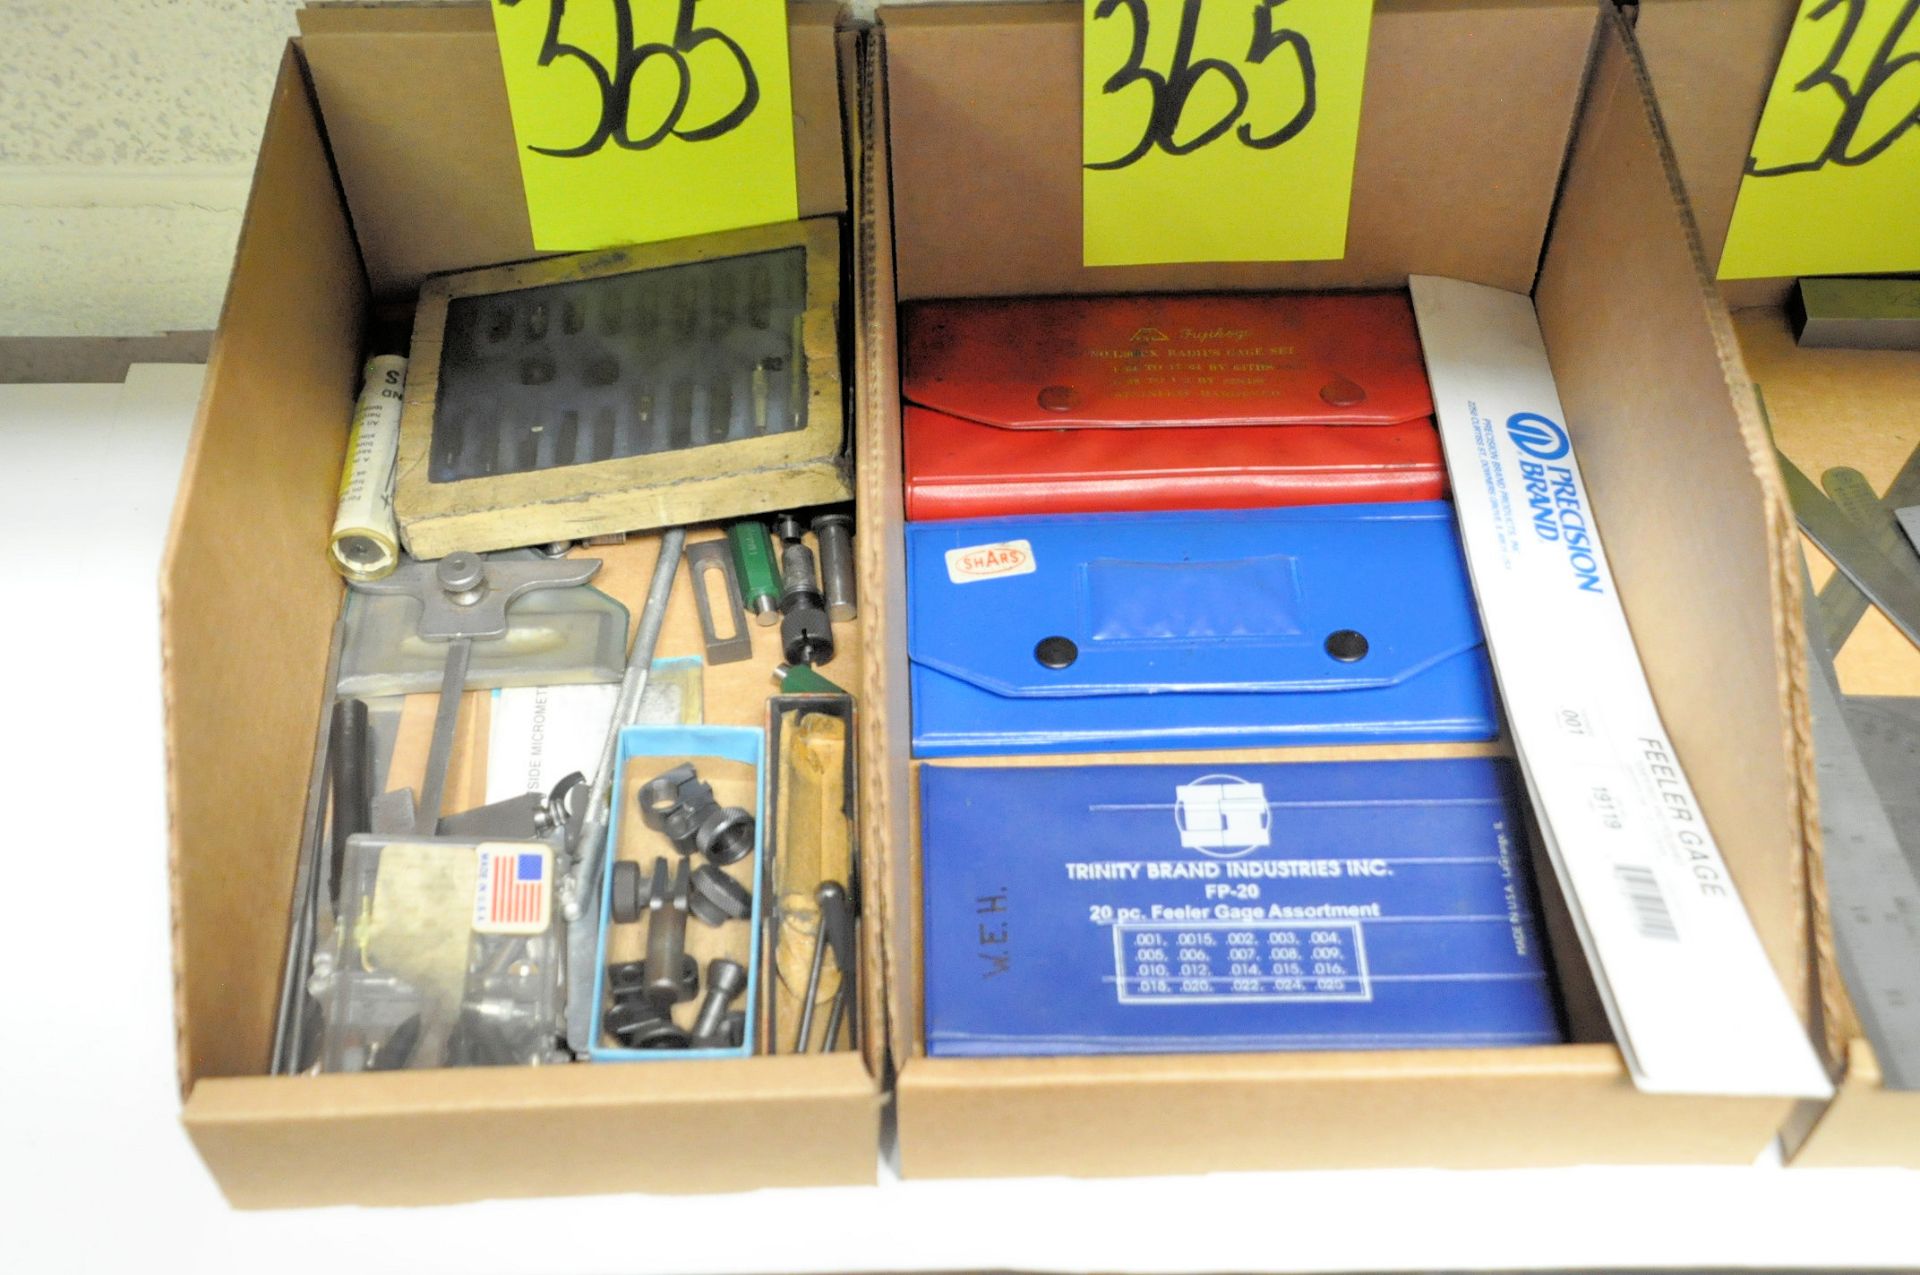 Lot-Steel Pocket Rules, Manual Calipers, Radius Gauges, etc. in (4) Boxes on (1) Shelf - Image 2 of 3